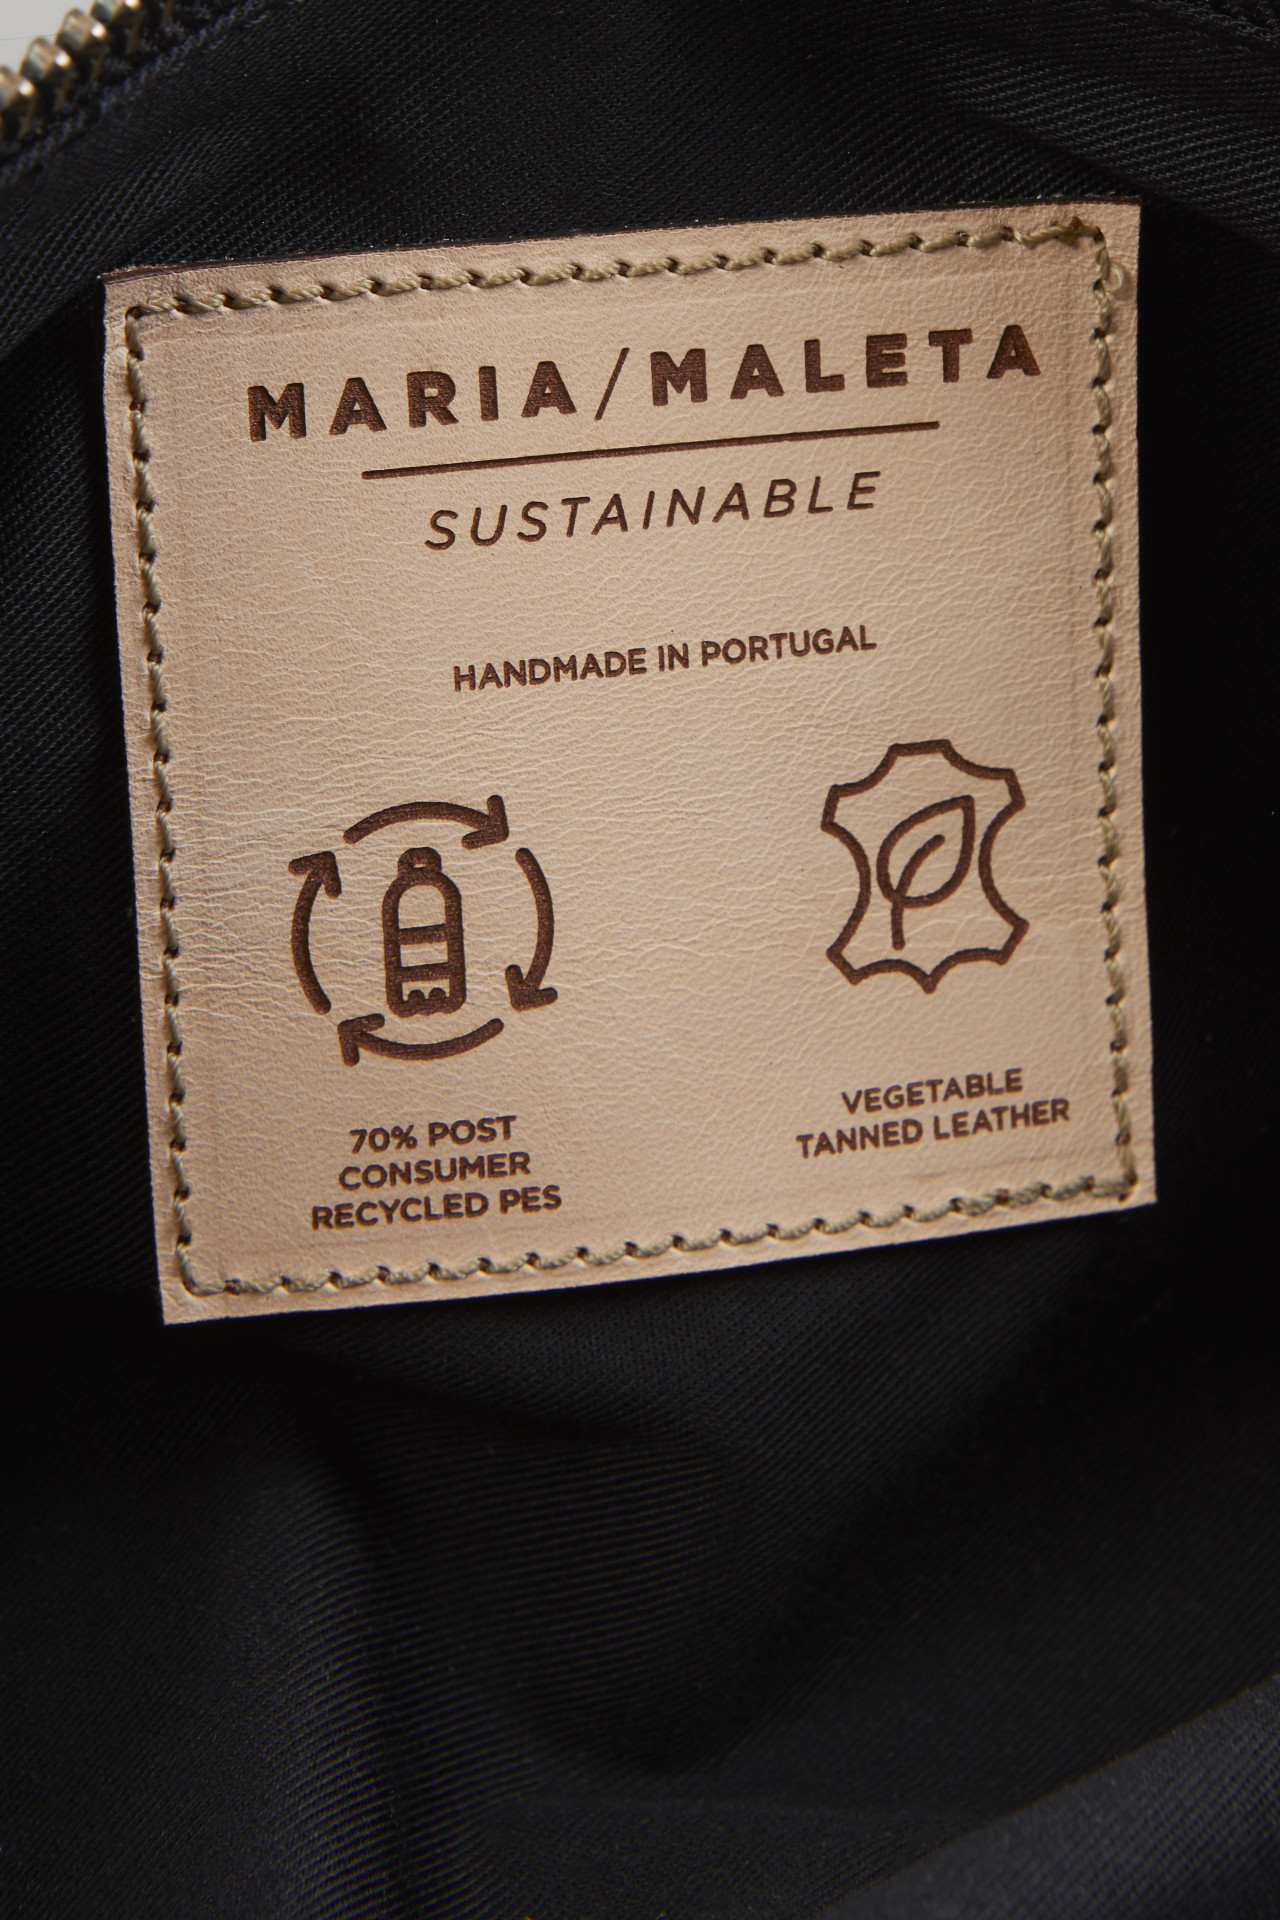 The Timeless + Sustainable No Season Bag Collection From Maria/Maleta ...